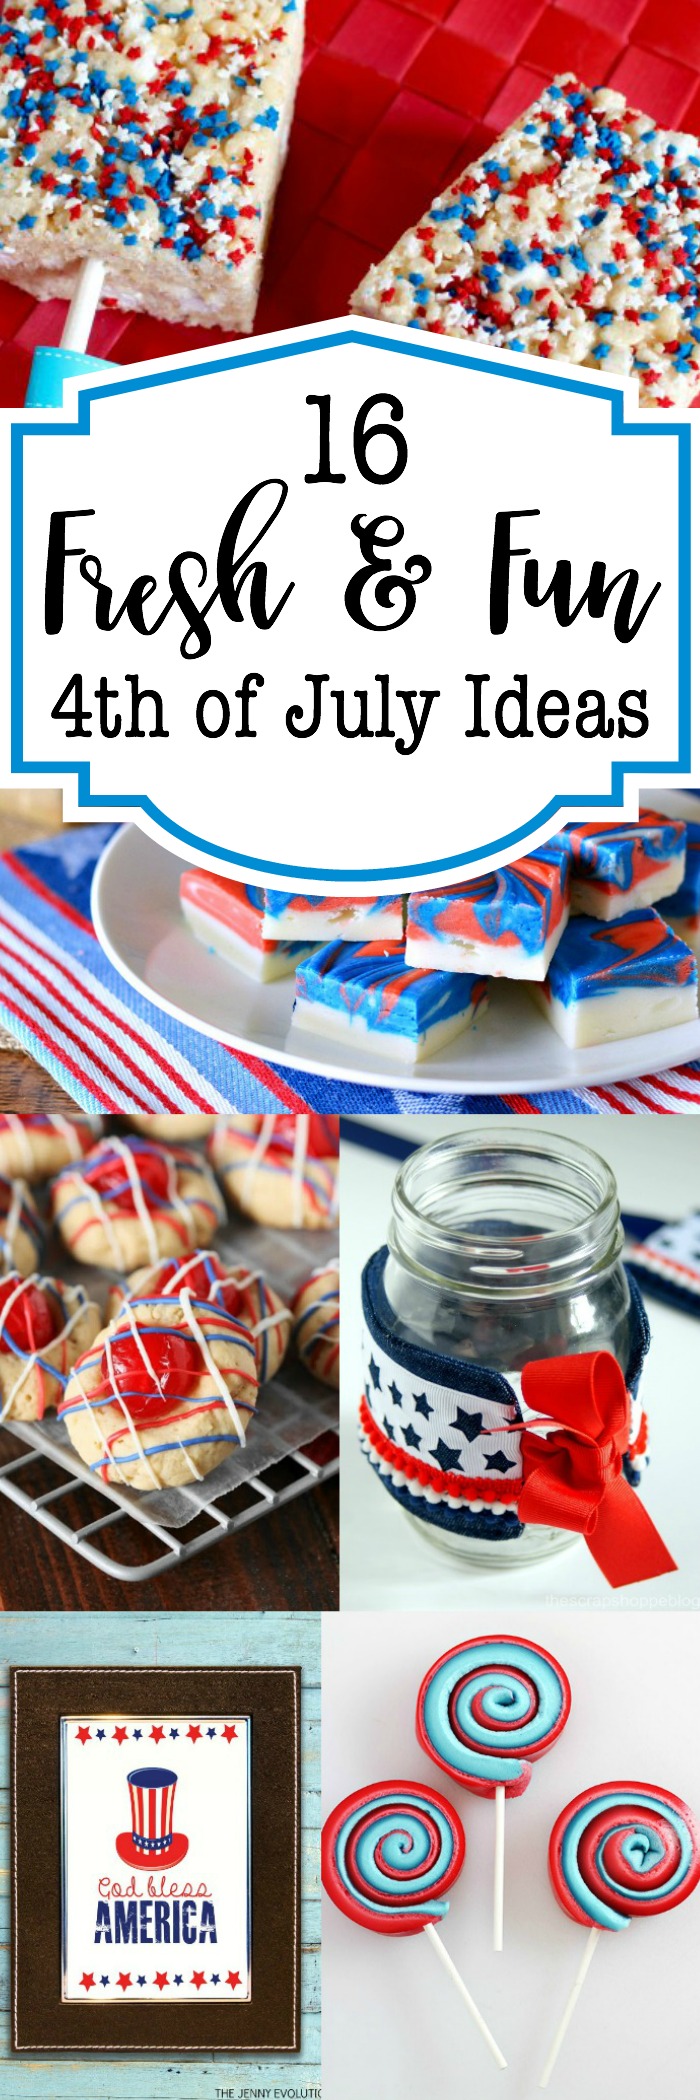 16 Fresh and Fun 4th of July Ideas